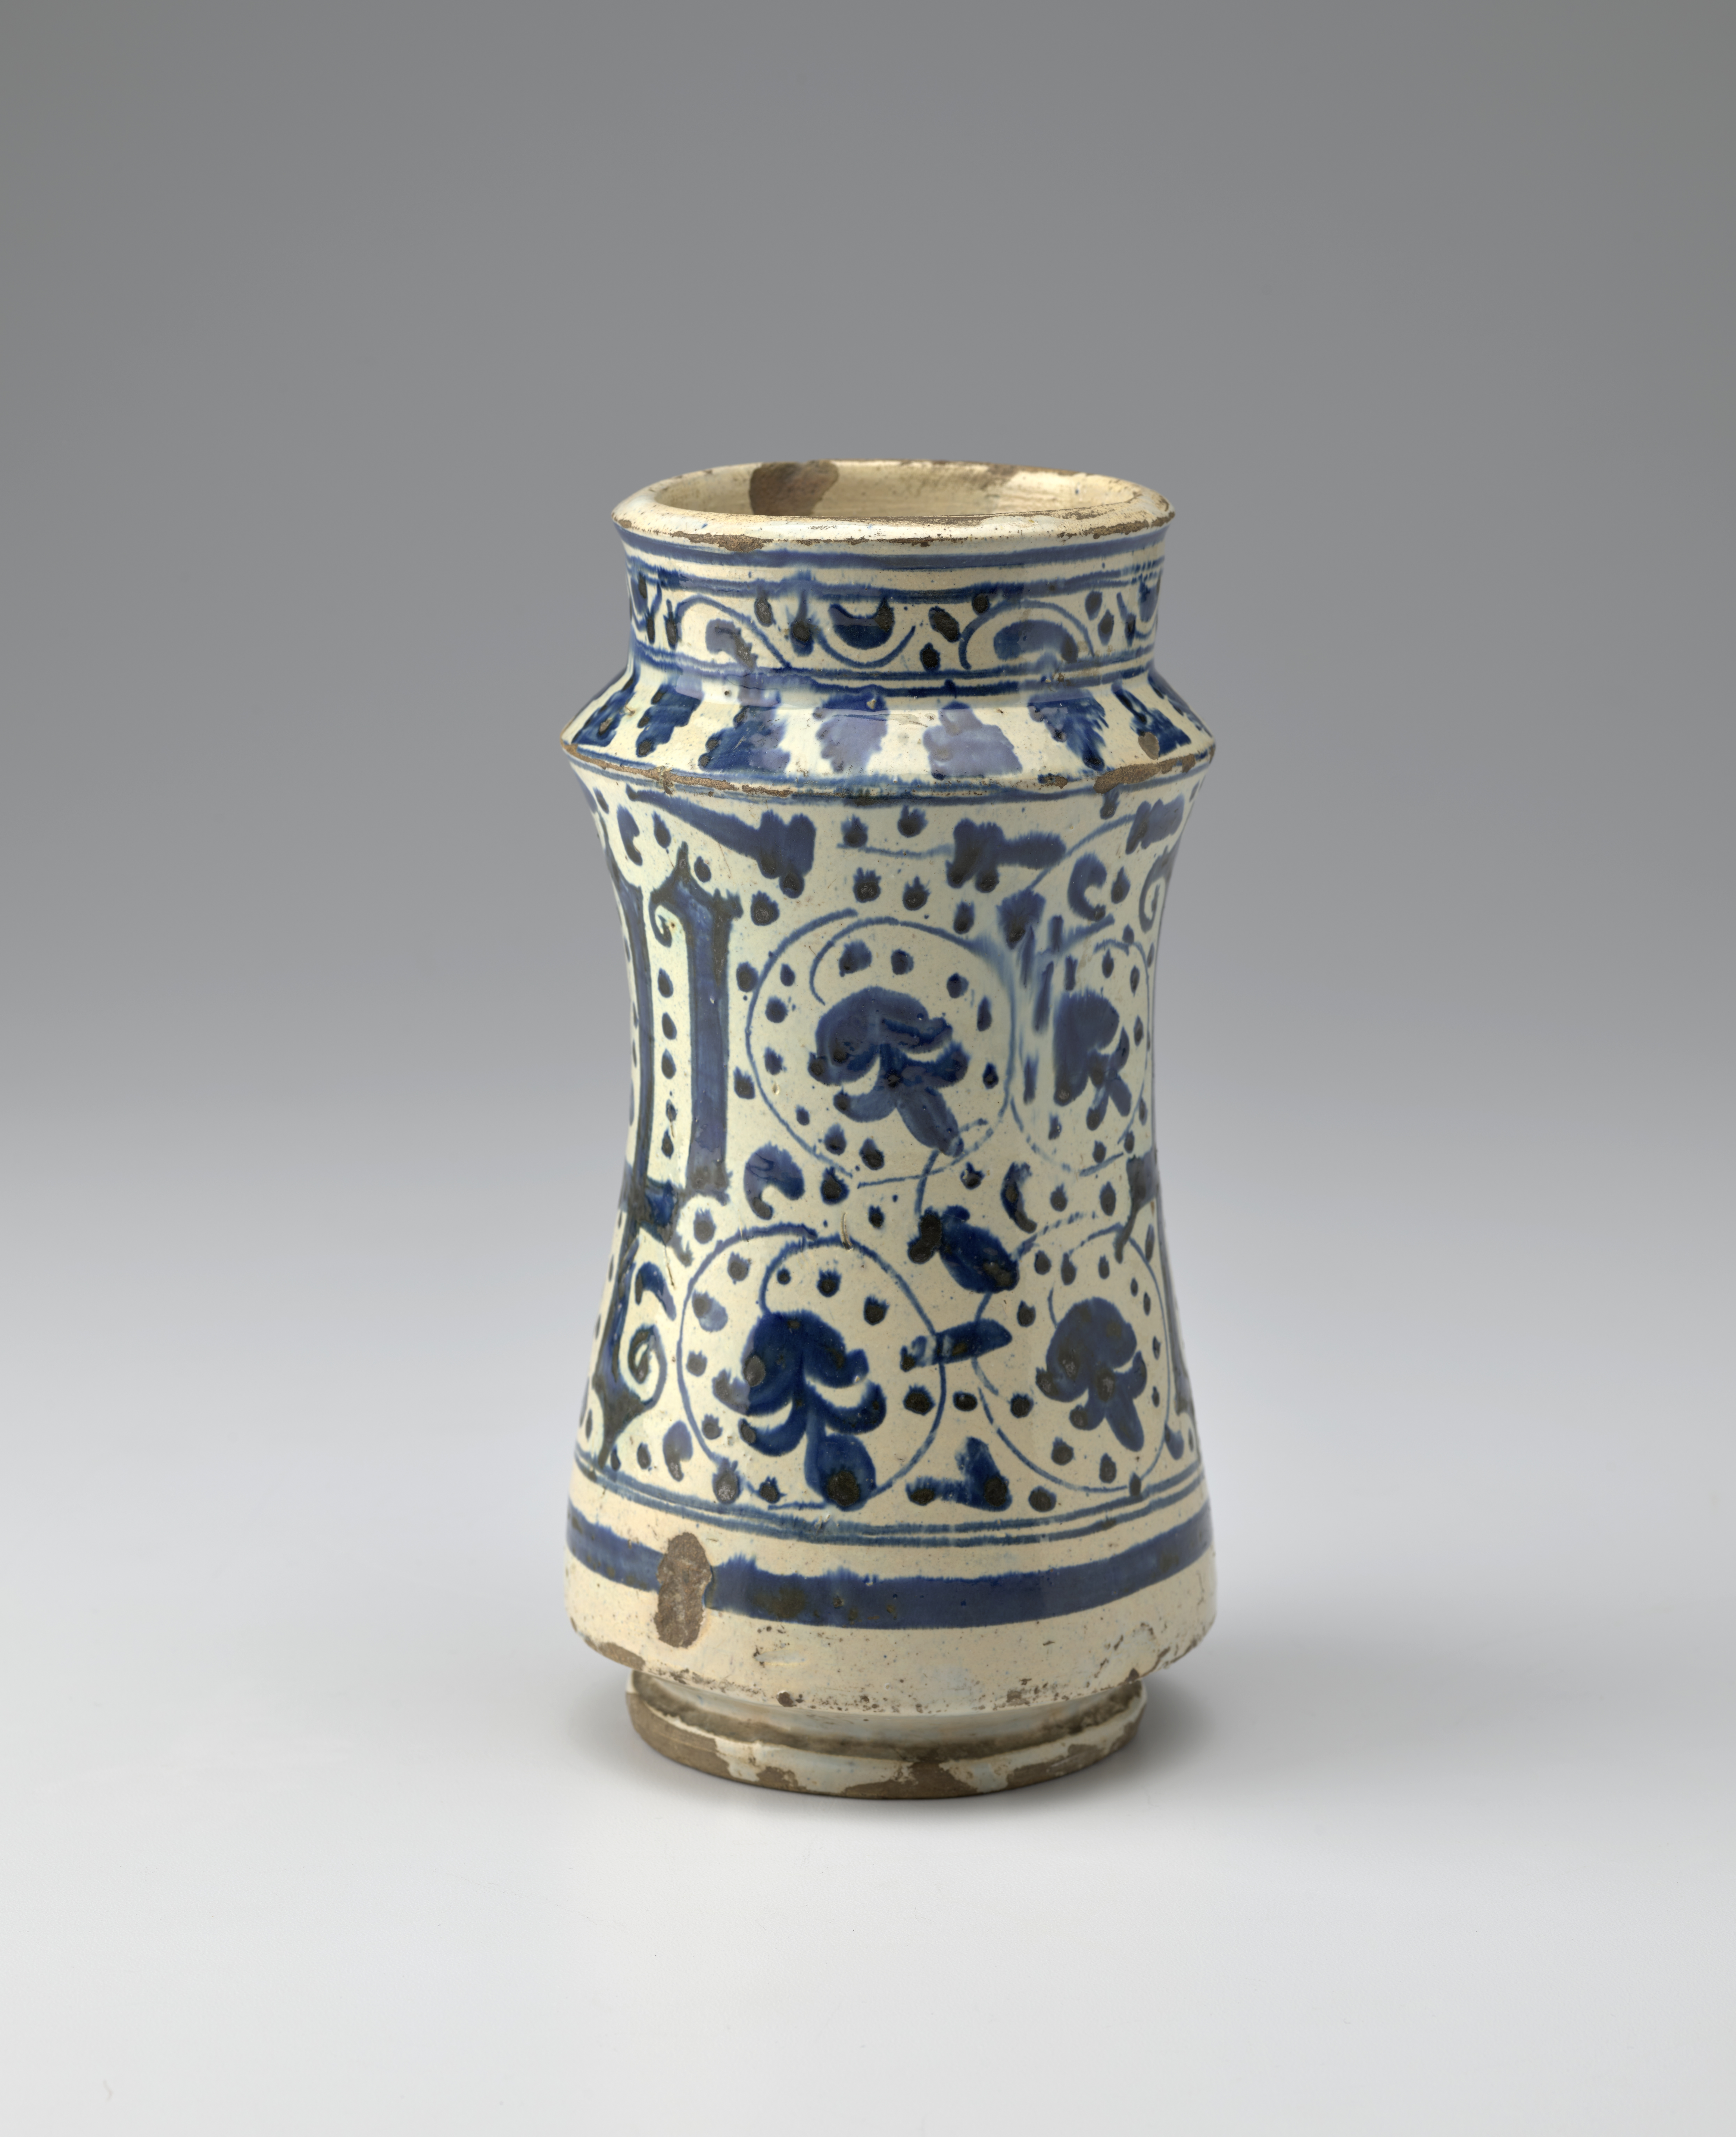 A blue and white pottery jar decorated with Gothic letter forms and floral patterns.